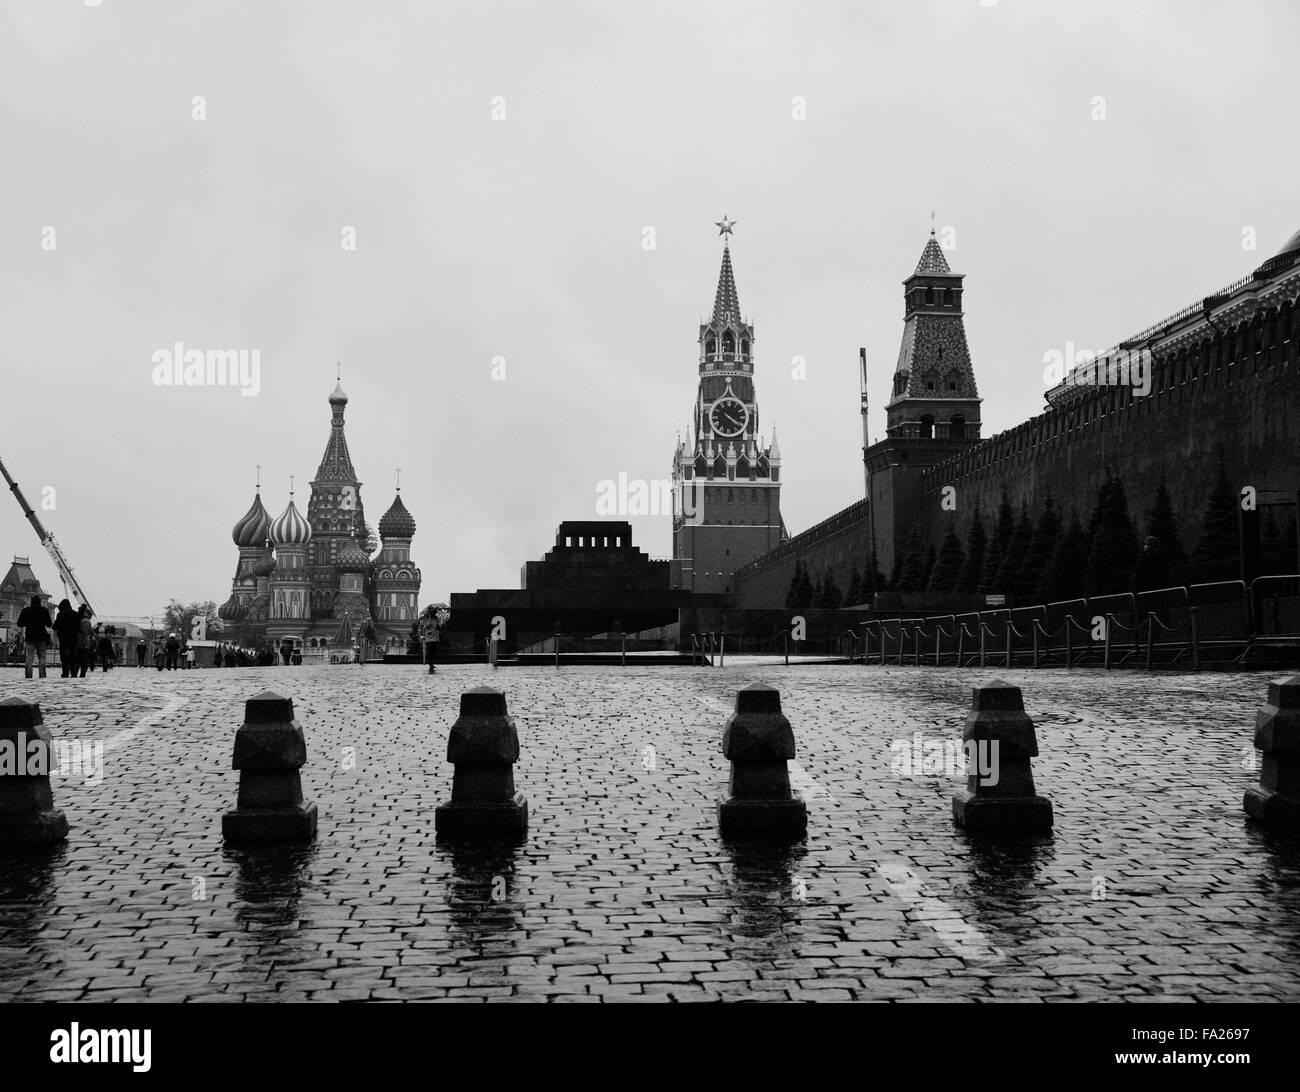 Black and white picture of Red Square in Moscow with Spasskaya tower, Lenin's mausoleum, and Saint Basil's Cathedral Stock Photo